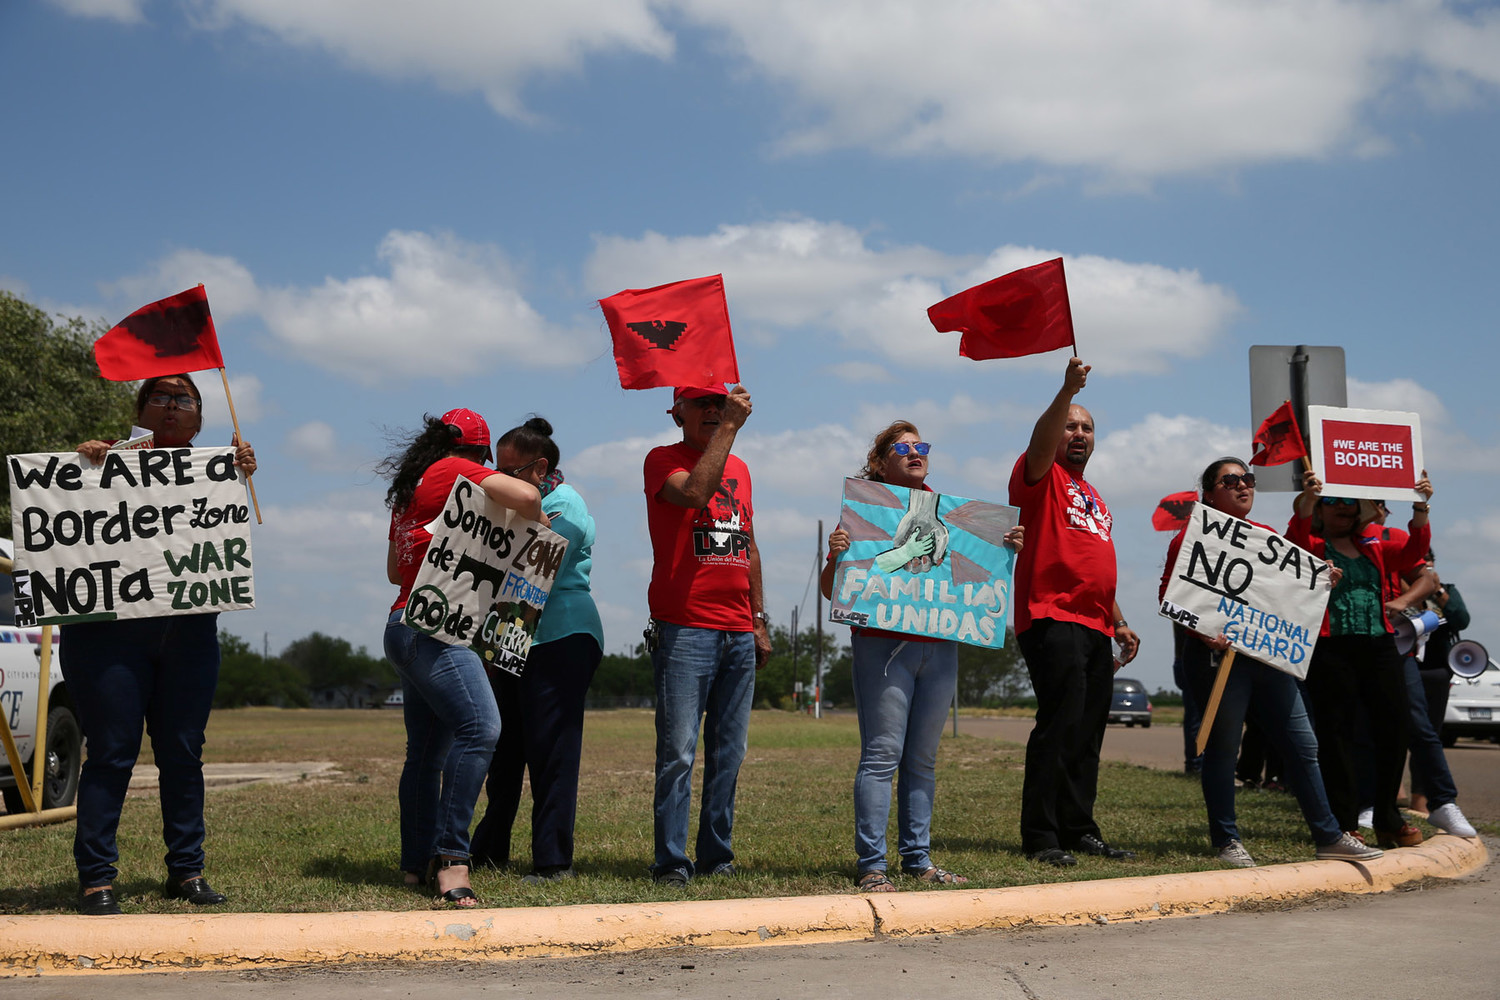 Demonstrators protest the deployment of National Guard troops to the U.S.-Mexico border April 12 before an appearance by Texas Gov. Greg Abbott at Sergeant Tomas Garces Texas Army National Guard Armory in Weslaco, Texas.